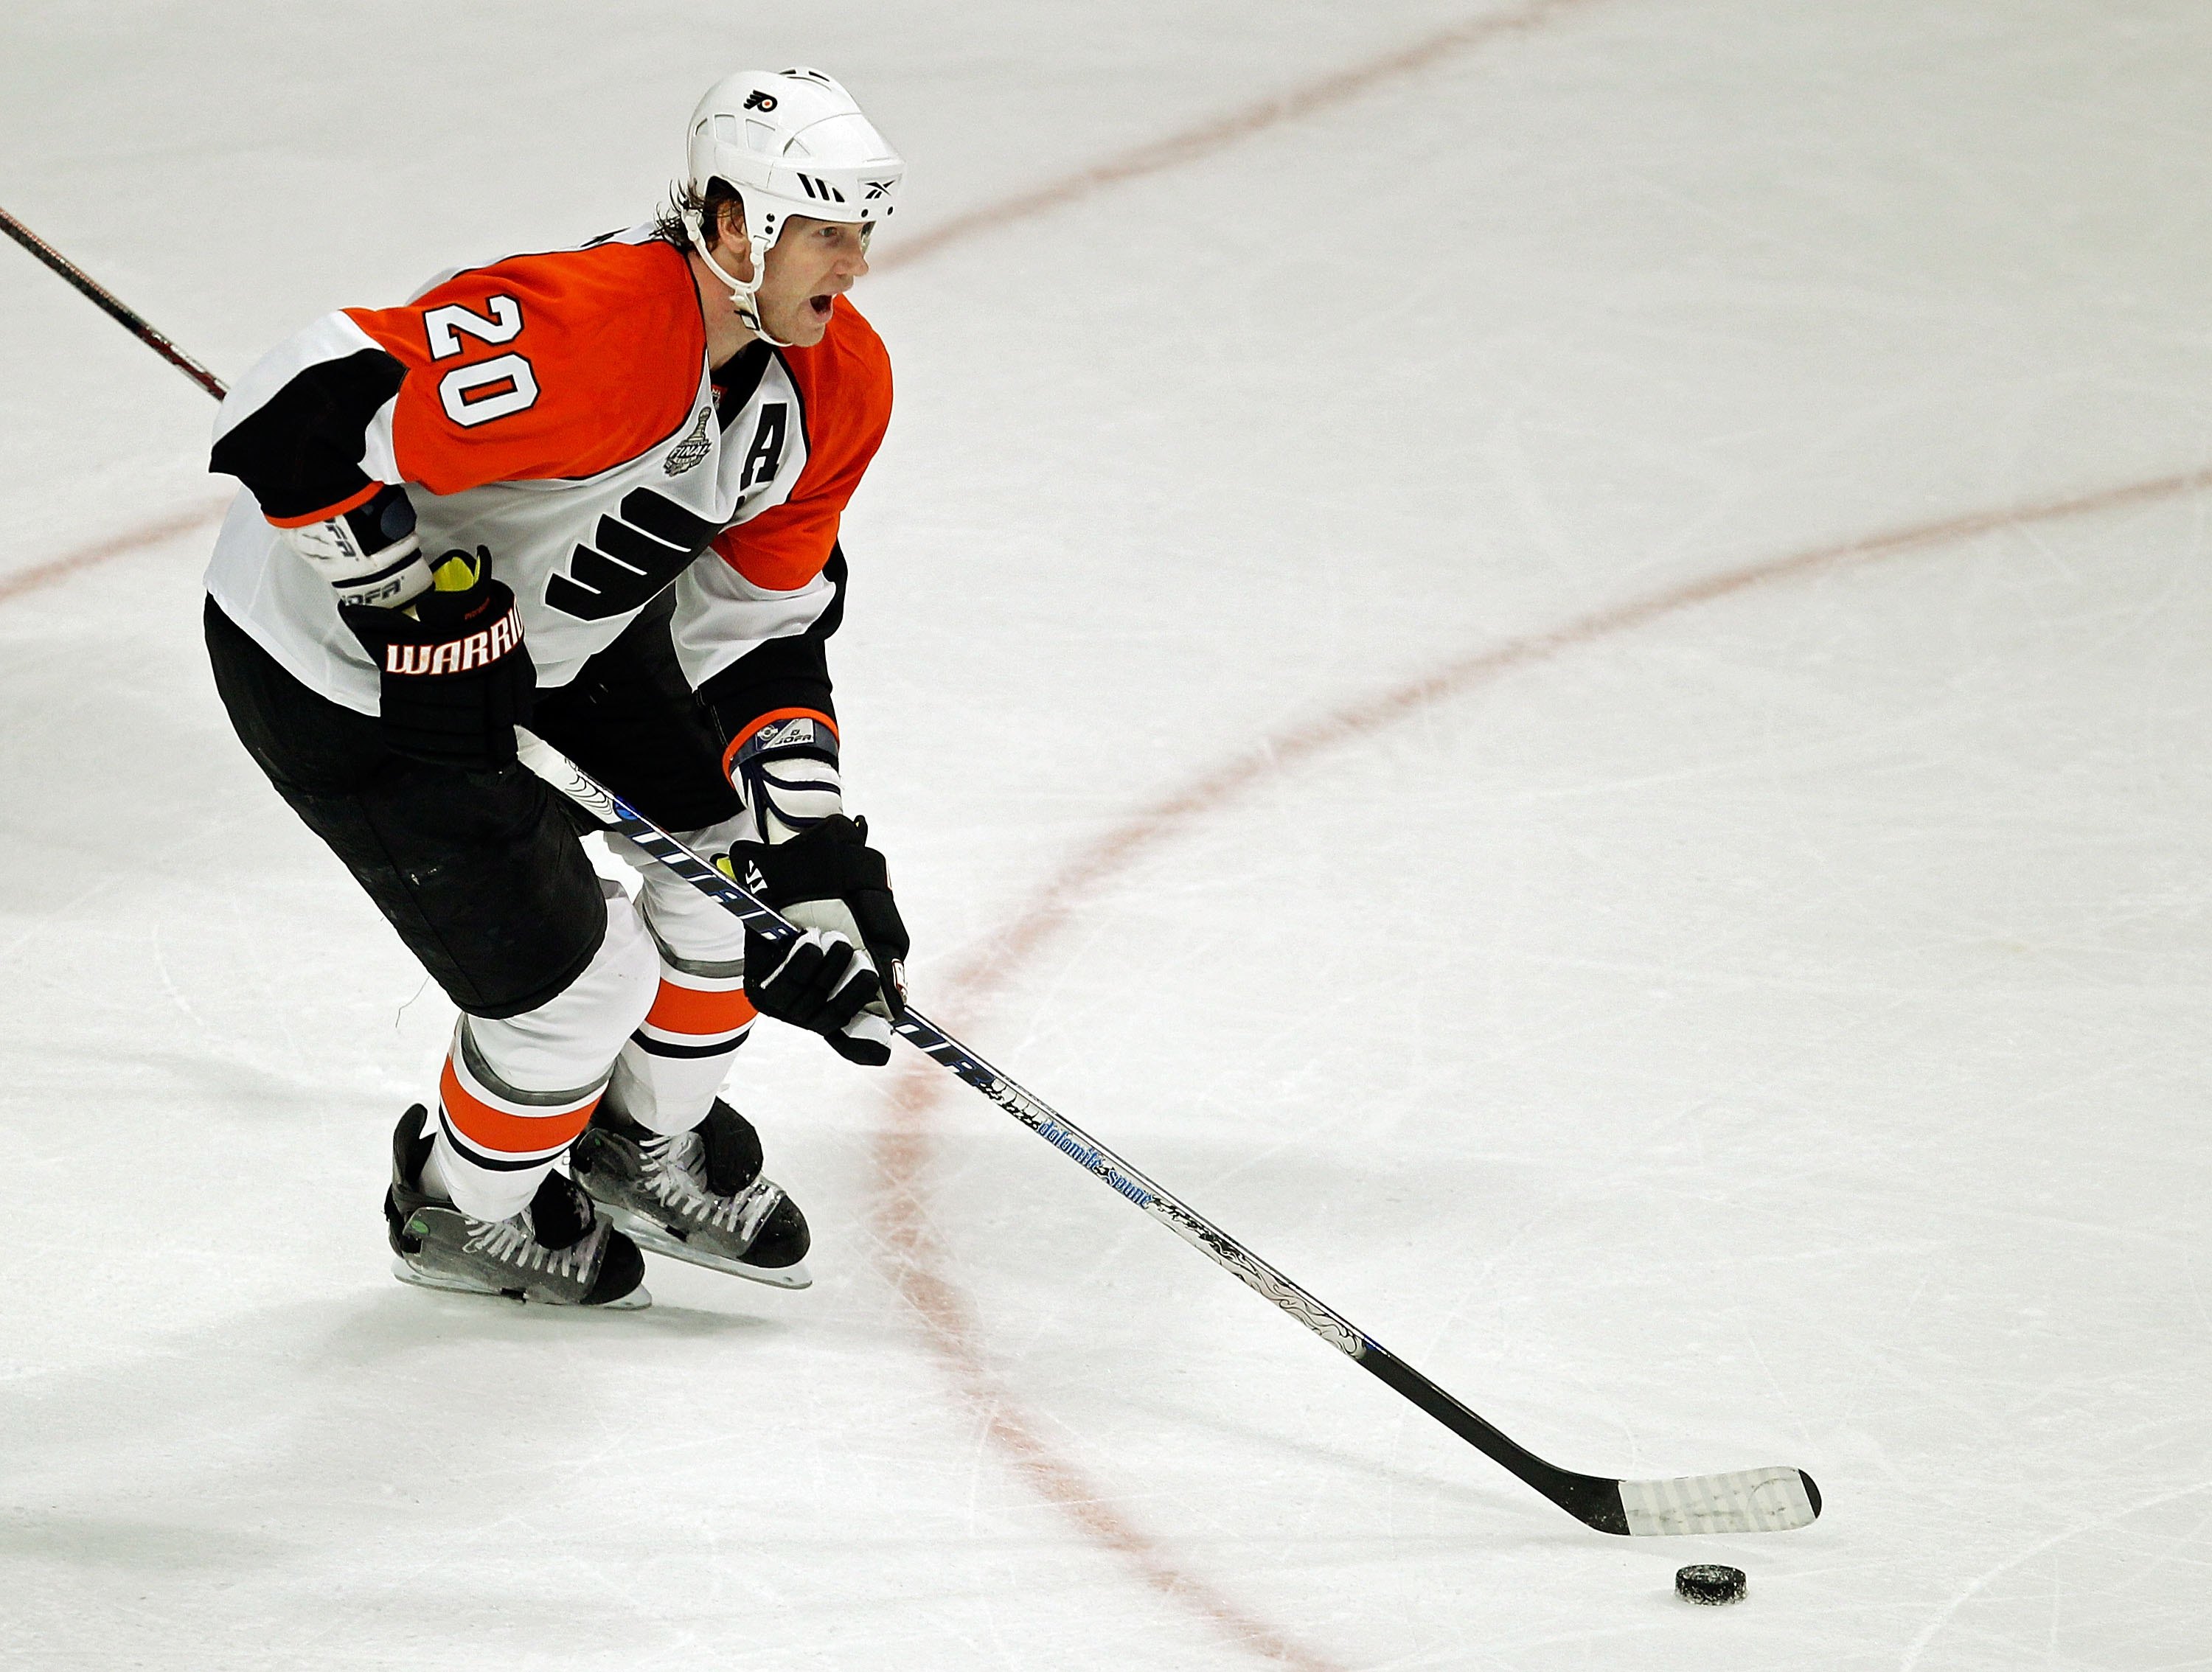 CHICAGO - MAY 29:  Chris Pronger #20 of the Philadelphia Flyers handles the puck against the Chicago Blackhawks in Game One of the 2010 NHL Stanley Cup Final at the United Center on May 29, 2010 in Chicago, Illinois.  (Photo by Jonathan Daniel/Getty Image